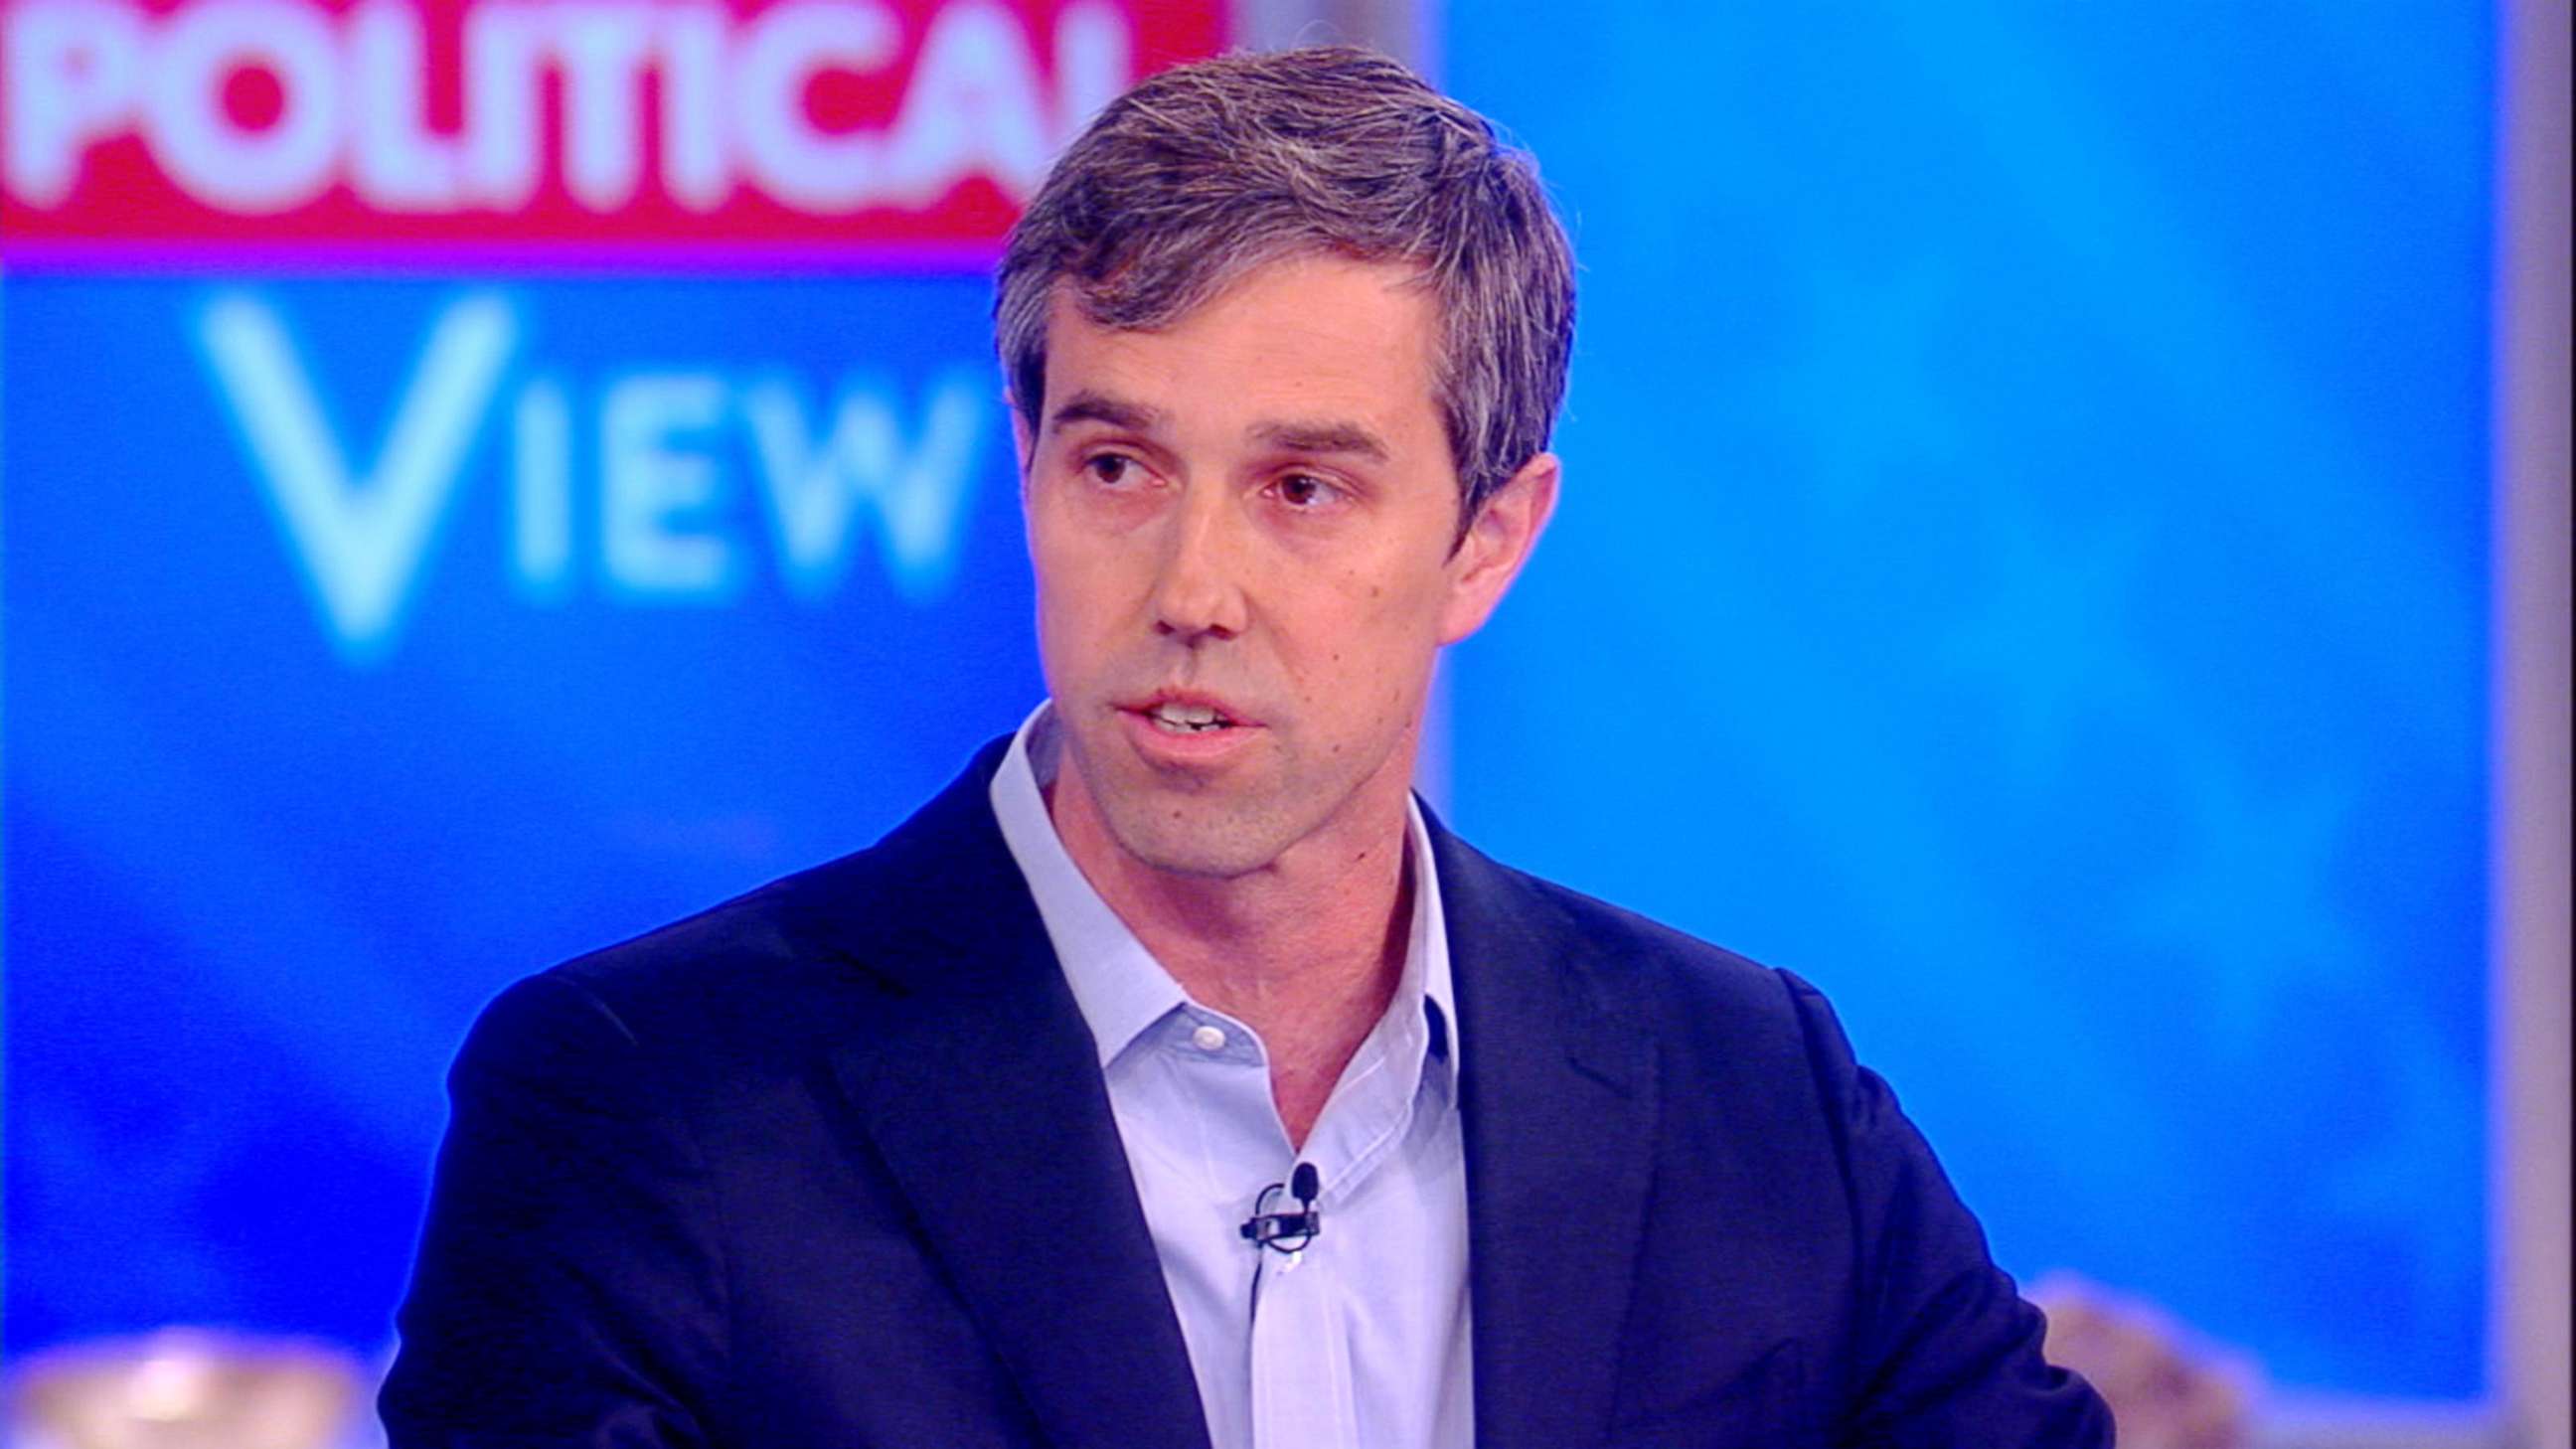 PHOTO: Beto O'Rourke appears on "The View," May 14, 2019.